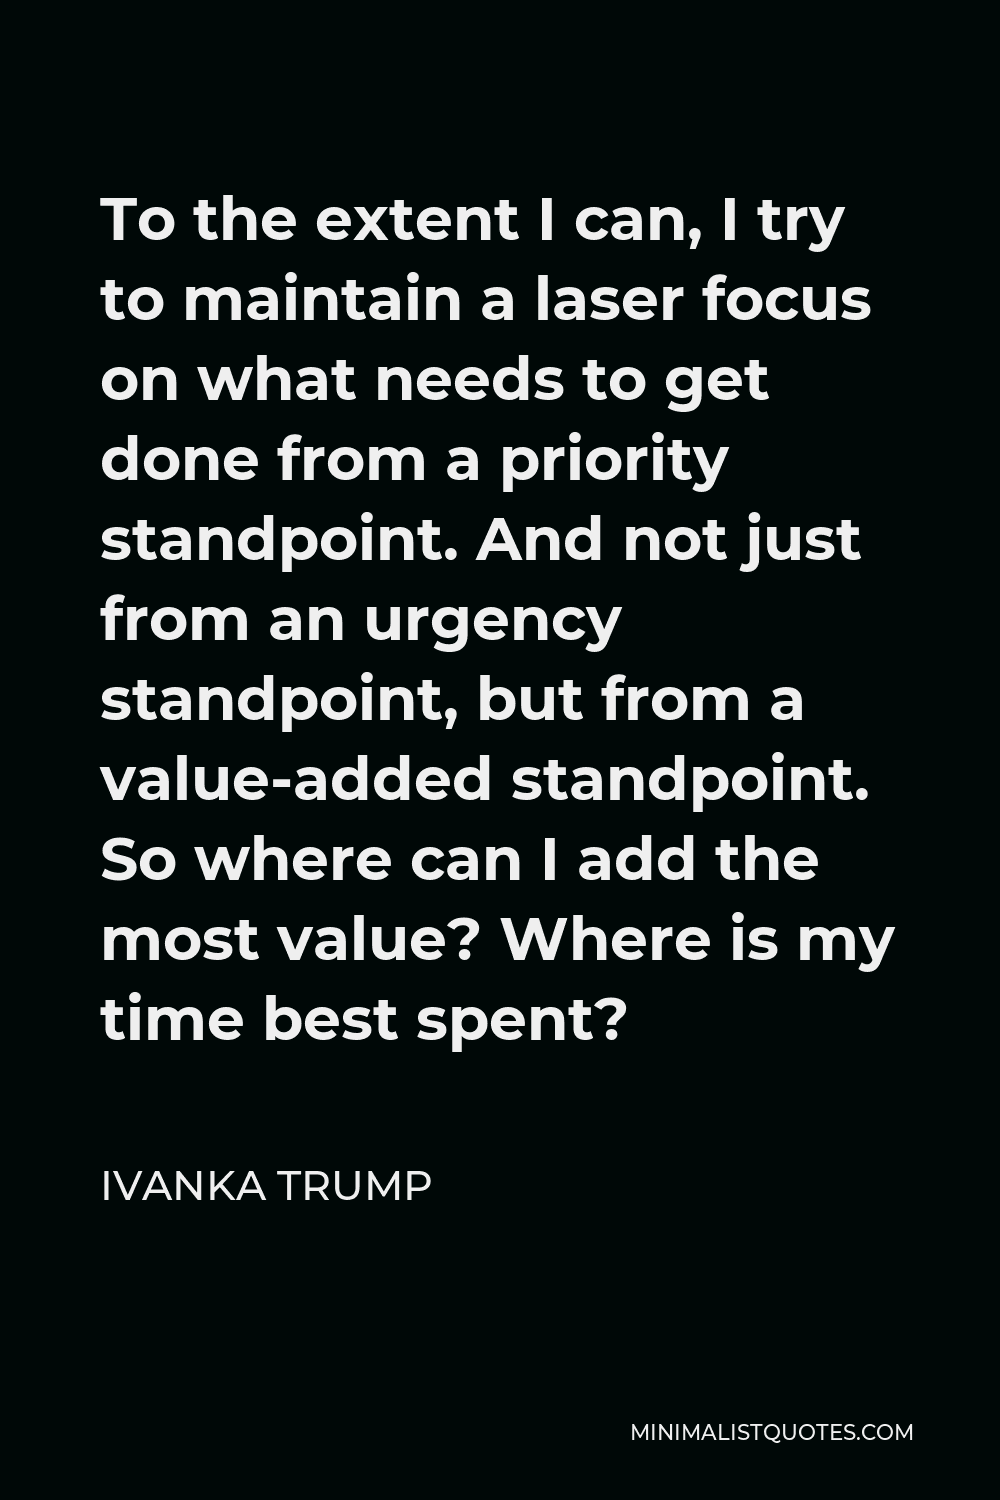 Ivanka Trump Quote - To the extent I can, I try to maintain a laser focus on what needs to get done from a priority standpoint. And not just from an urgency standpoint, but from a value-added standpoint. So where can I add the most value? Where is my time best spent?